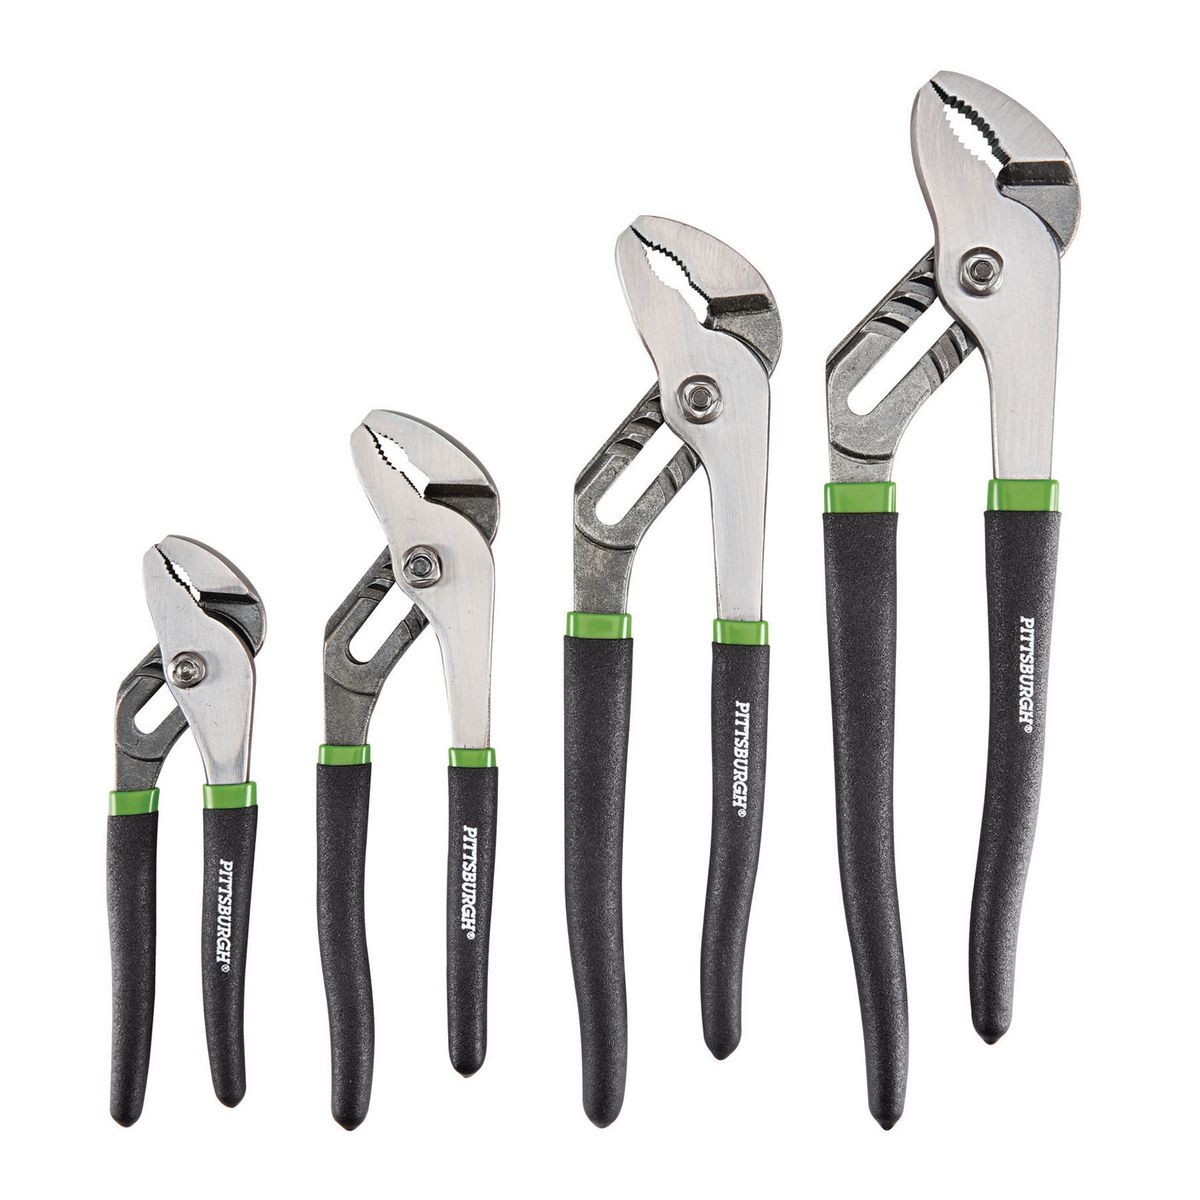 PITTSBURGH Tongue and Groove Joint Pliers Set 4 Pc. - Item 64093 / 43553 / 60817 / 64091 / 64092 / 69376 / 69680